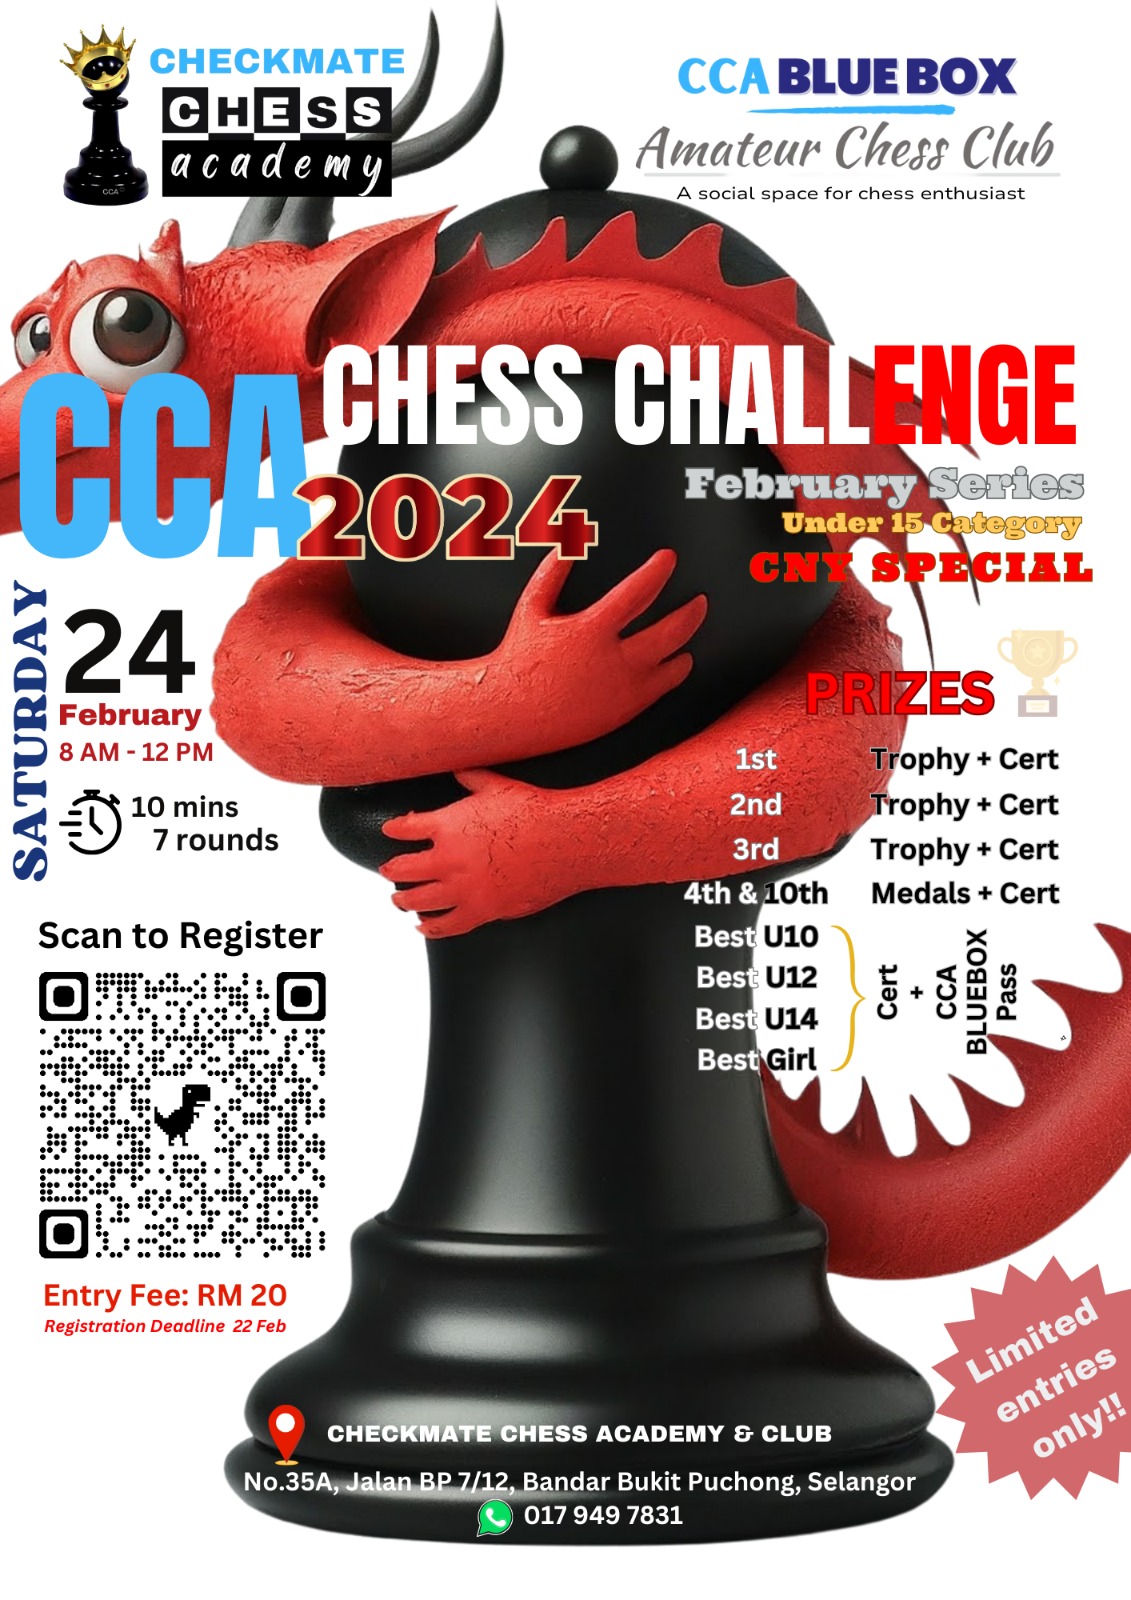 CCA Chess Challenge 2024 February Series - Under 15 Category